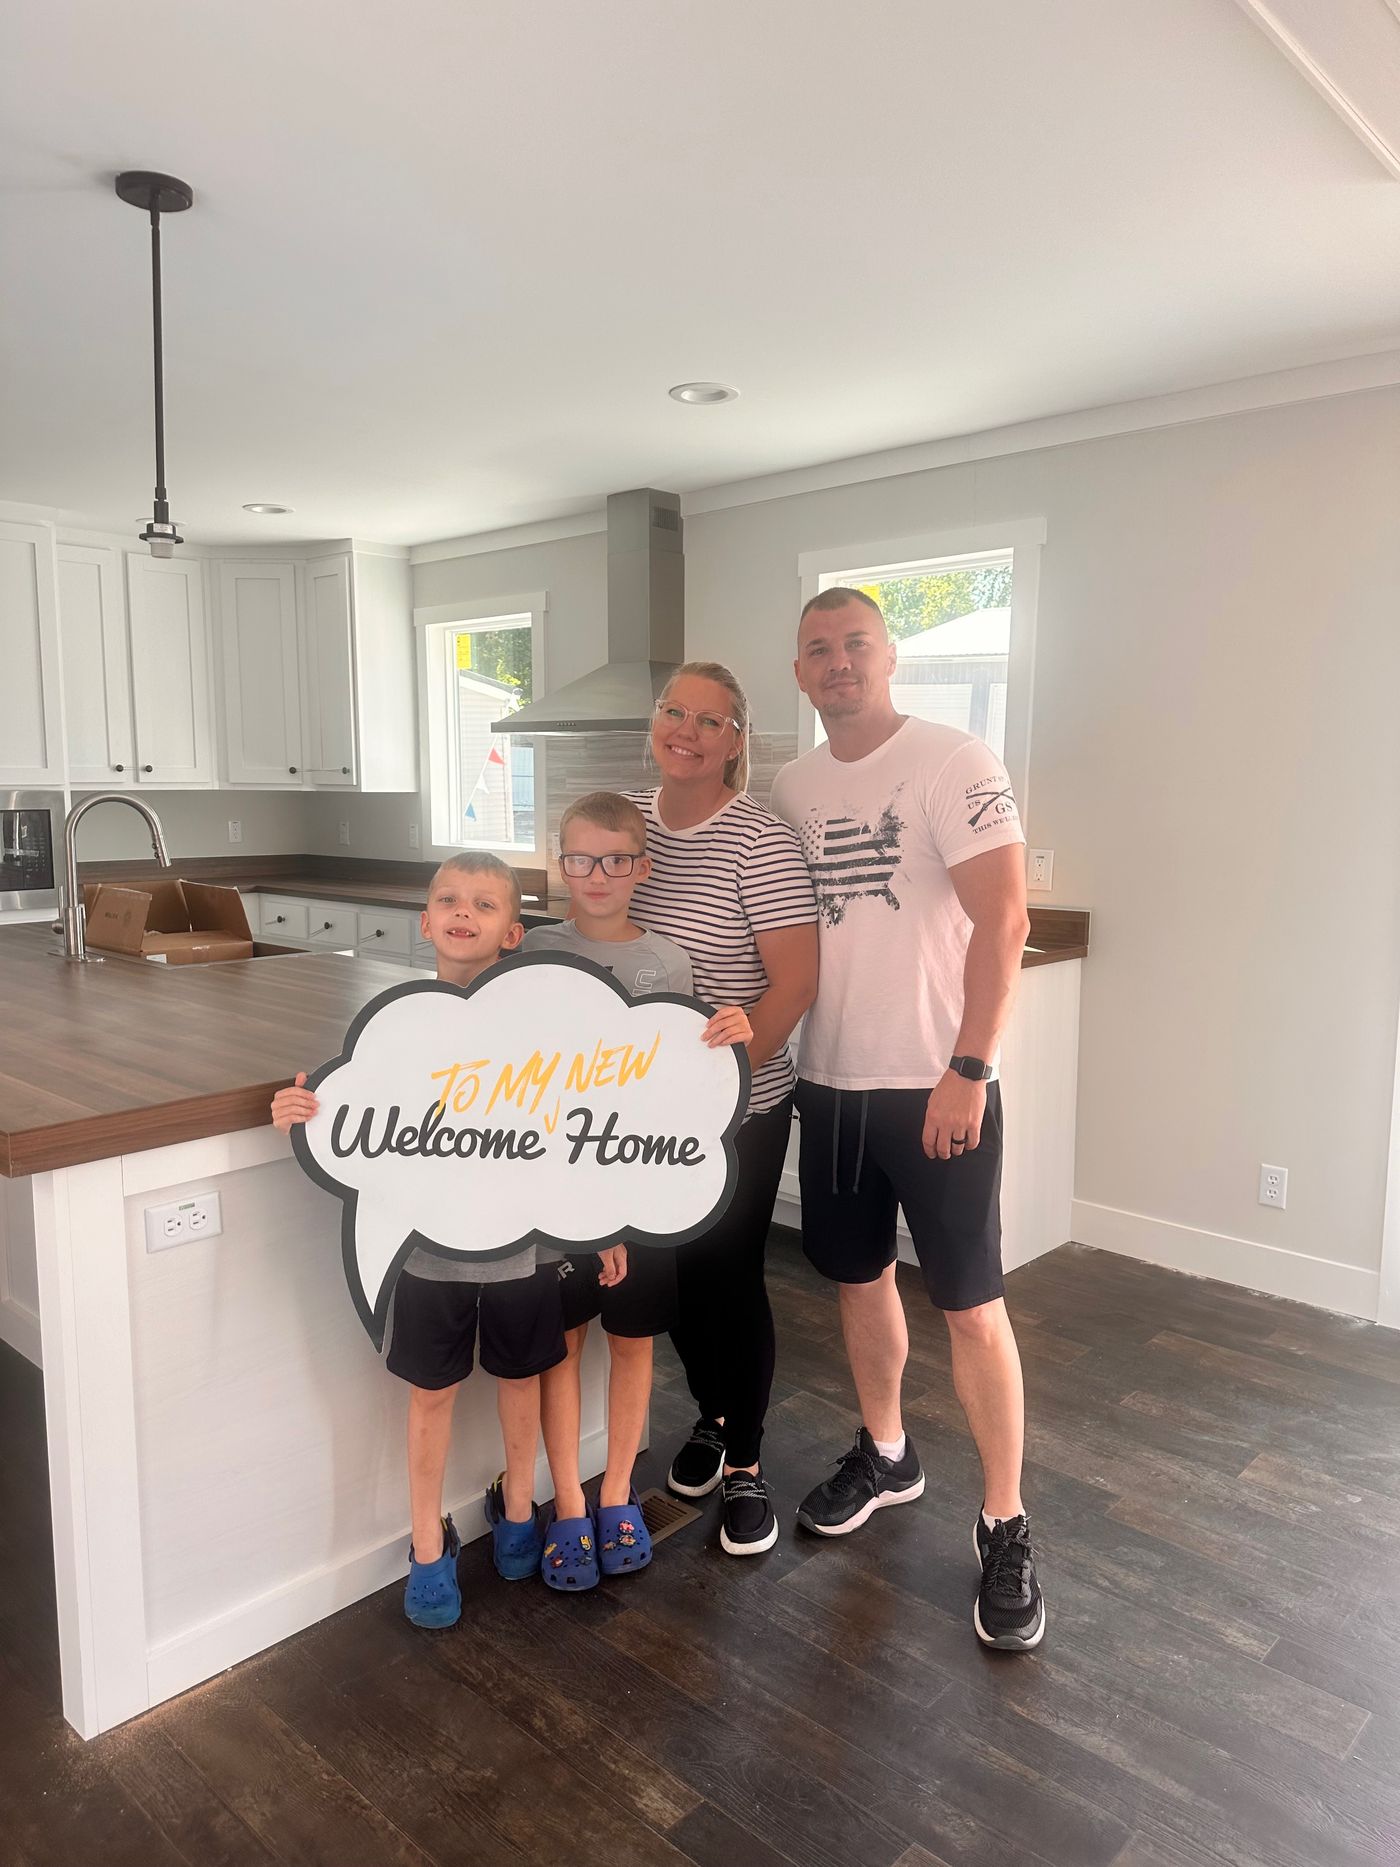 CRAIG G. welcome home image